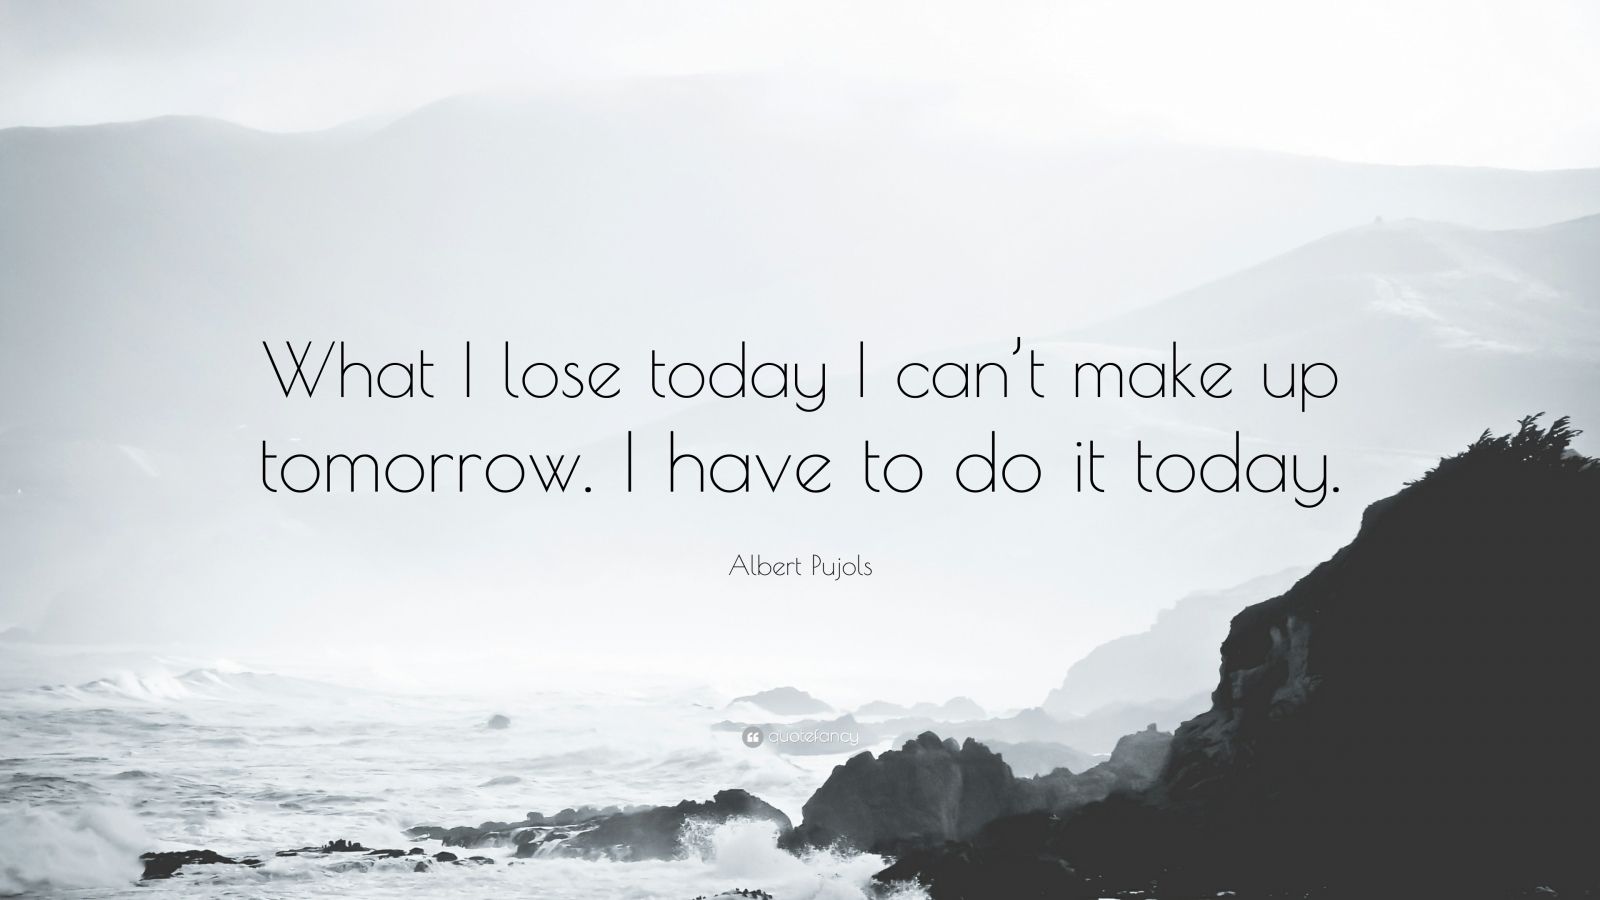 Albert Pujols Quote: “What I lose today I can't make up tomorrow. I have to